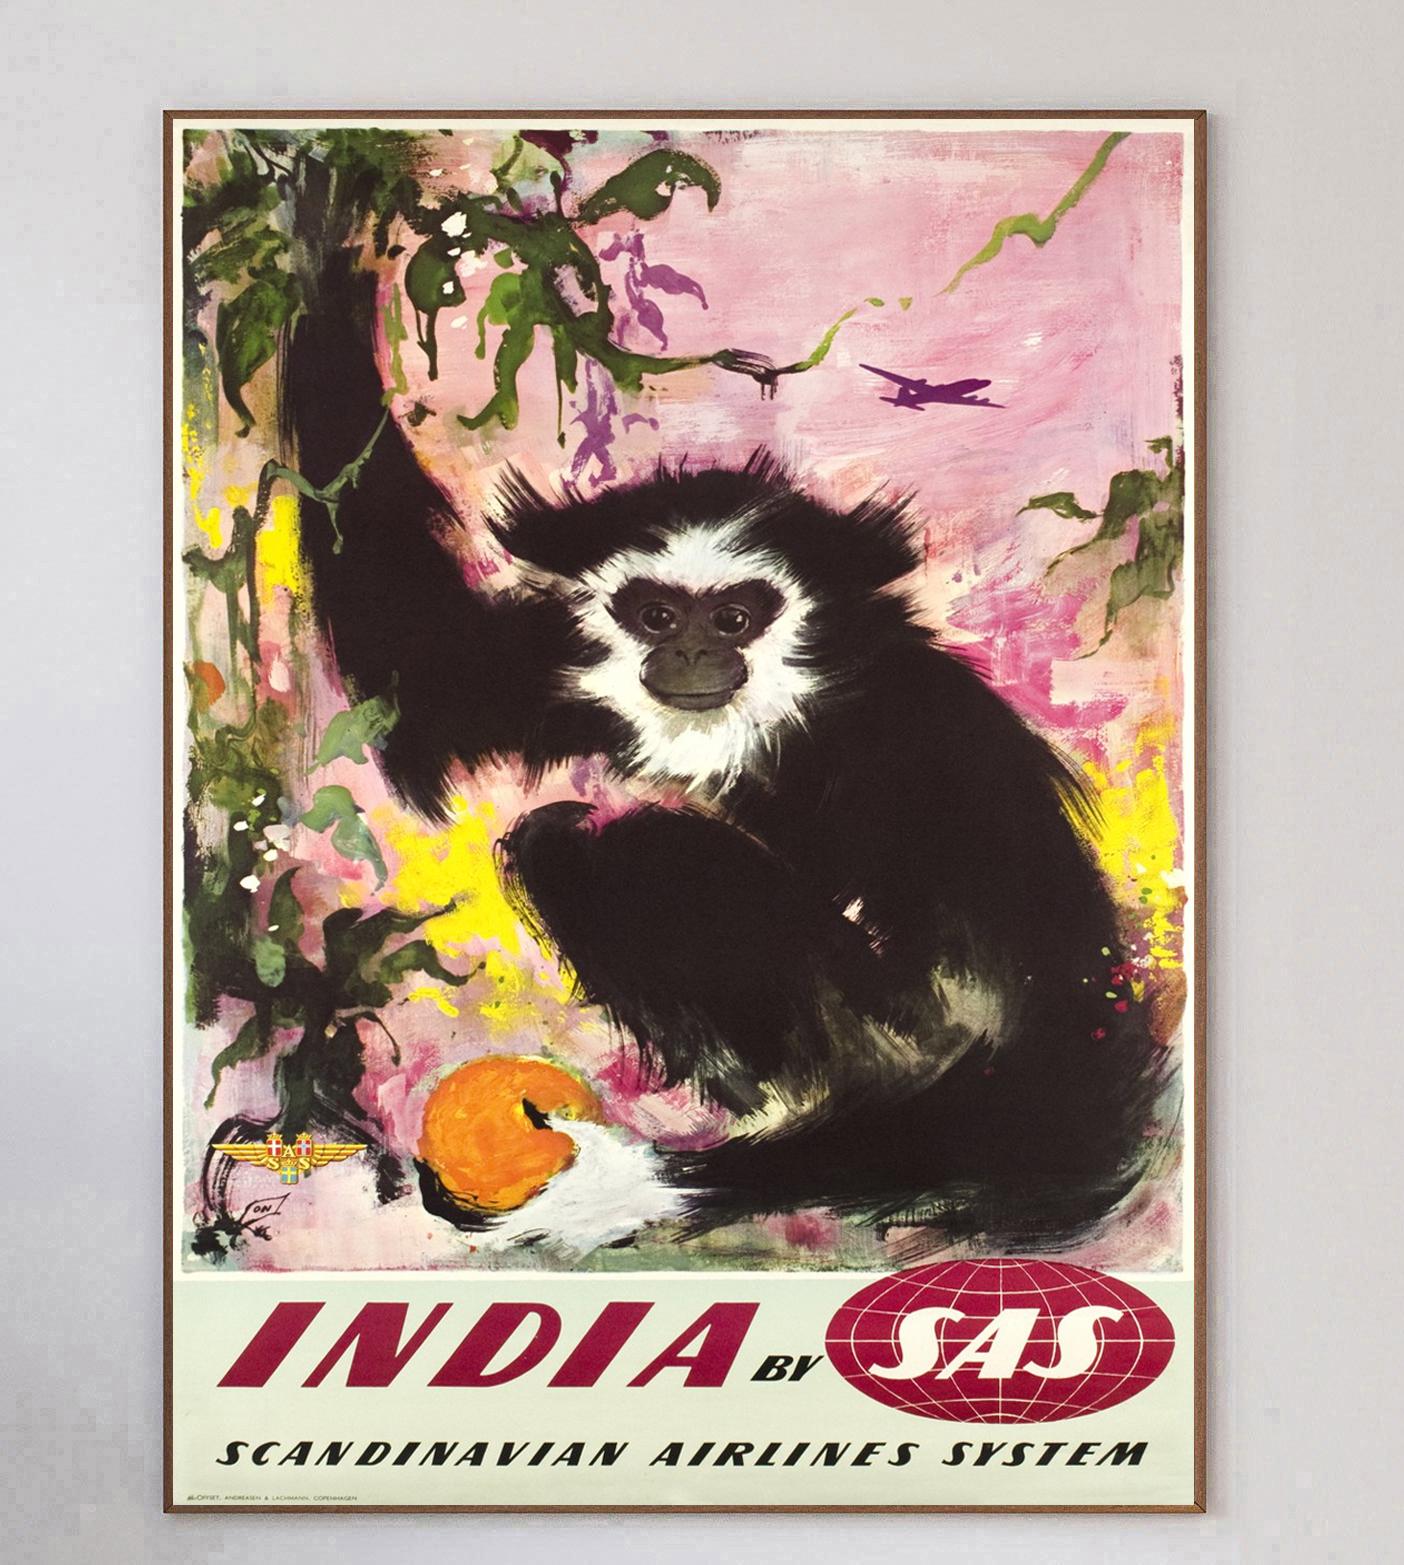 With fabulous artwork from Danish artist Otto Nielsen who worked on many SAS posters of the era, this poster promoting the Scandinavian airlines routes to India was created in 1955. Founded in 1946, Scandinavian Airline System or SAS is the flag